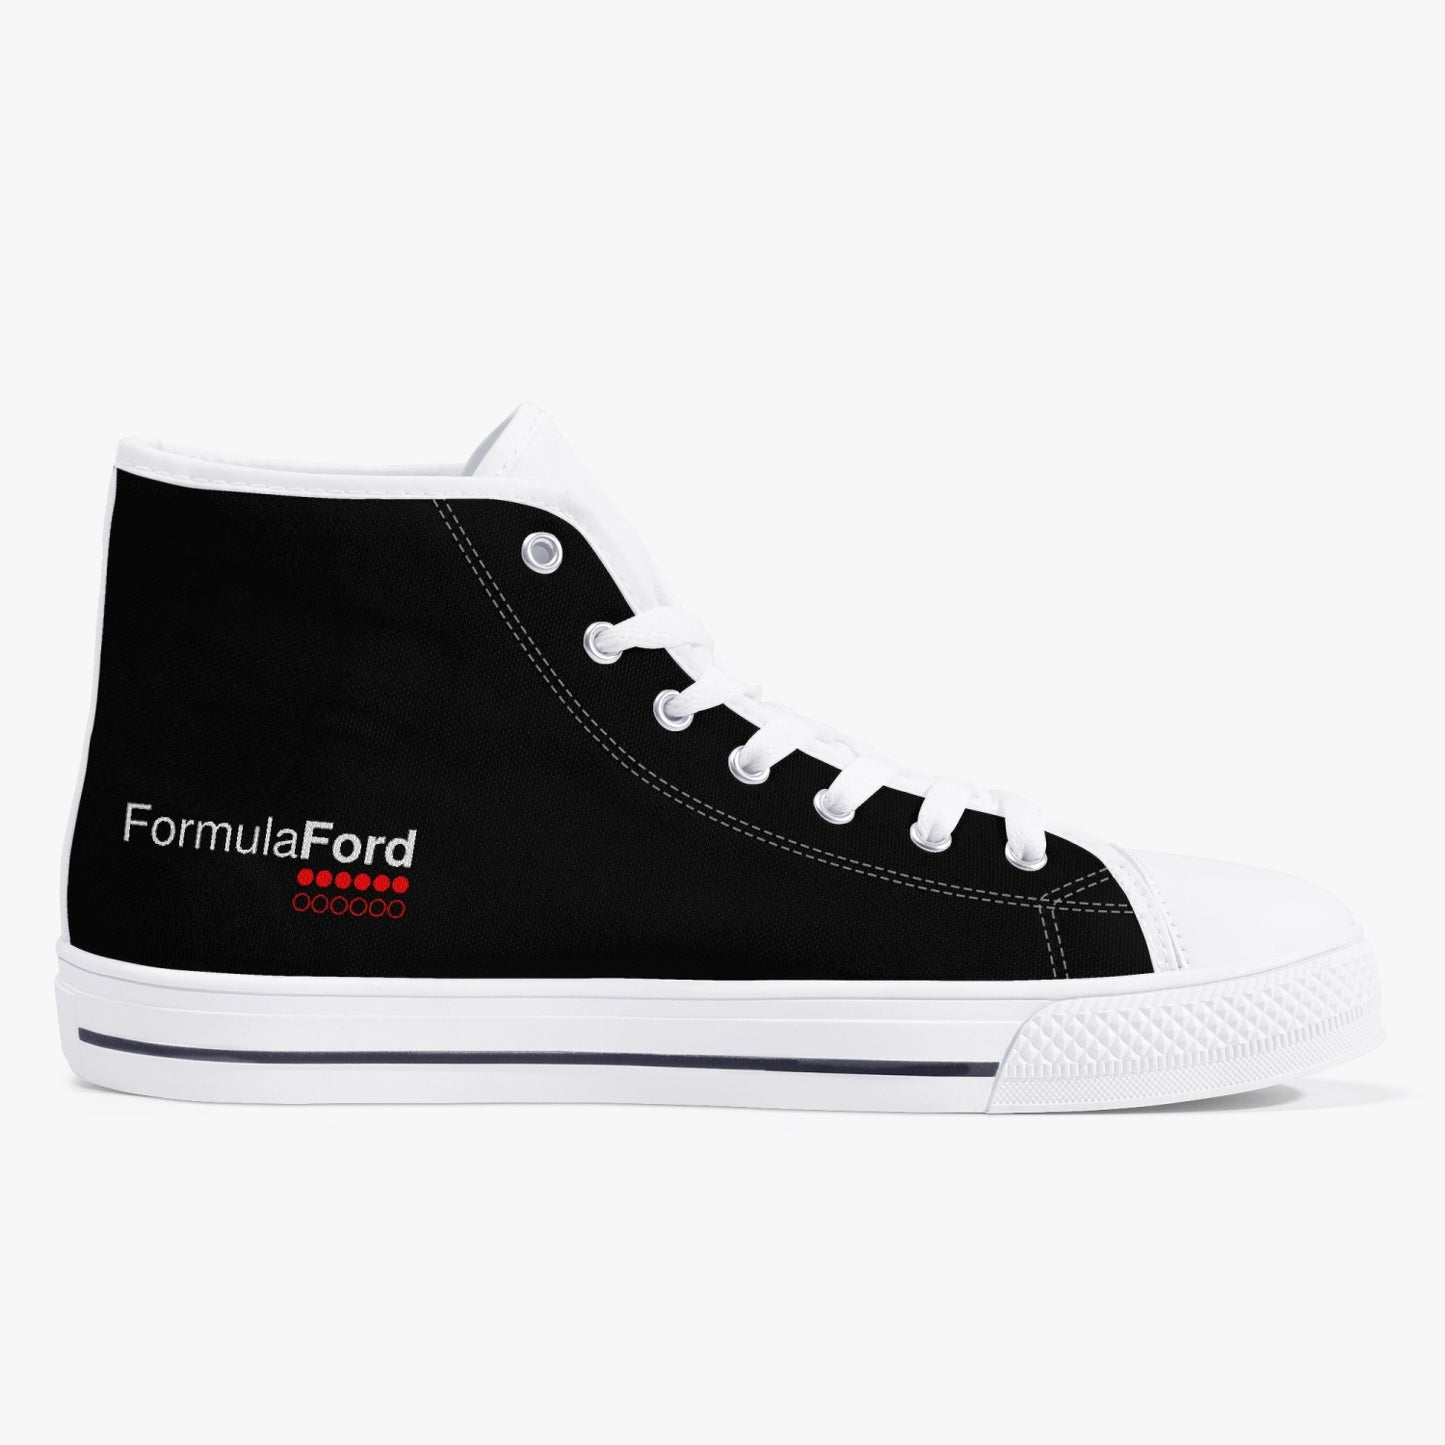 FORMULA FORD Official Classic High-Top Canvas Shoes - carbon